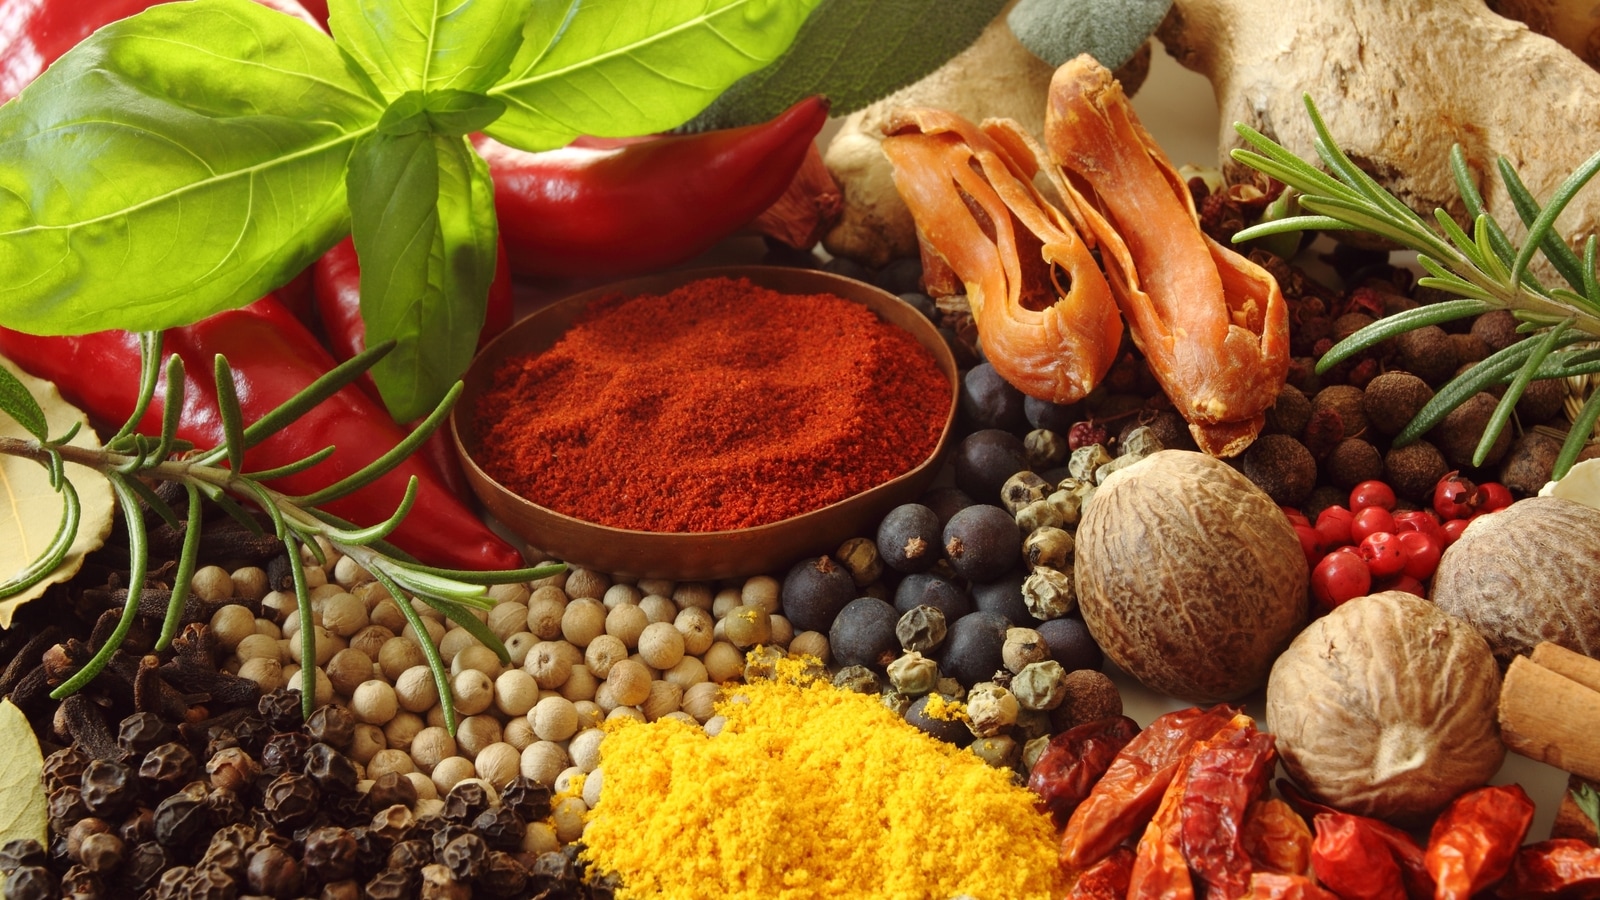 Spices Background Images  Free Download on Freepik